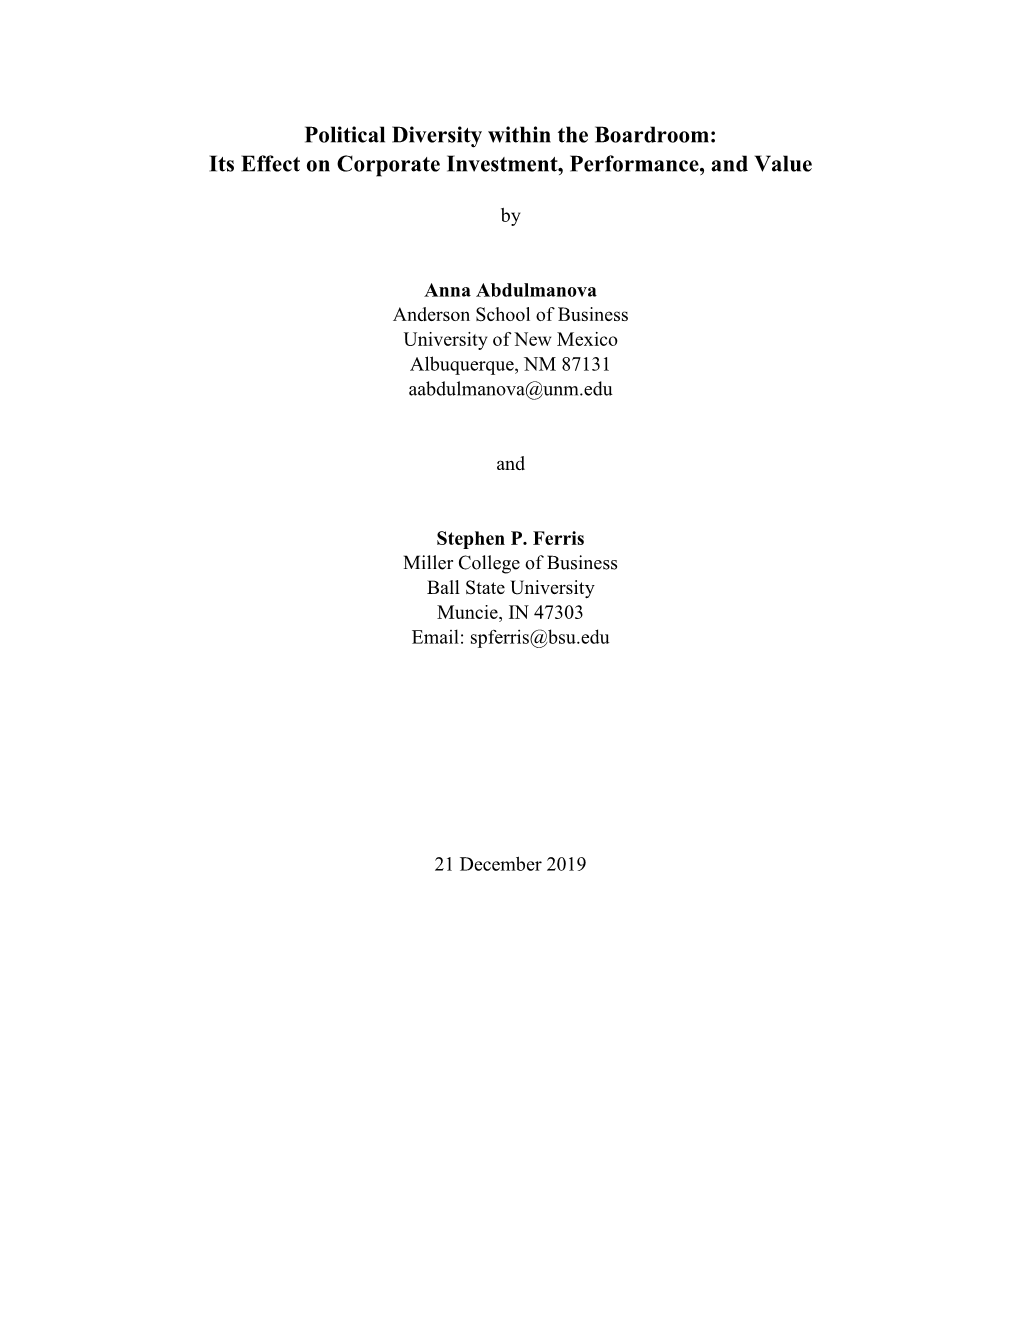 Political Diversity Within the Boardroom: Its Effect on Corporate Investment, Performance, and Value